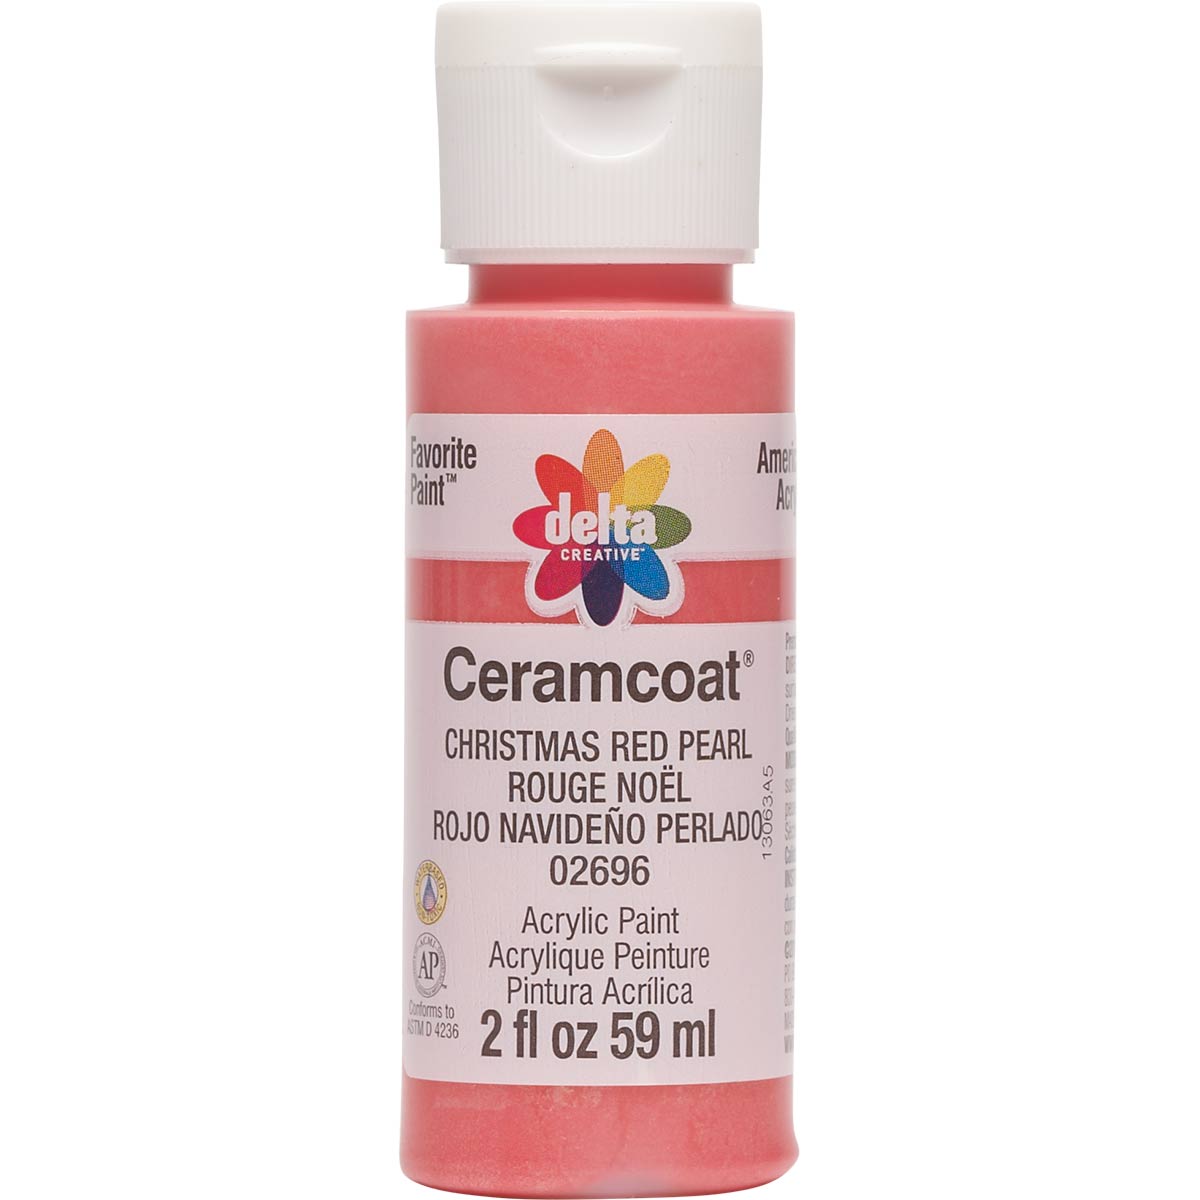 Delta Ceramcoat ® Acrylic Paint - Christmas Red Pearl, 2 oz. - 02696